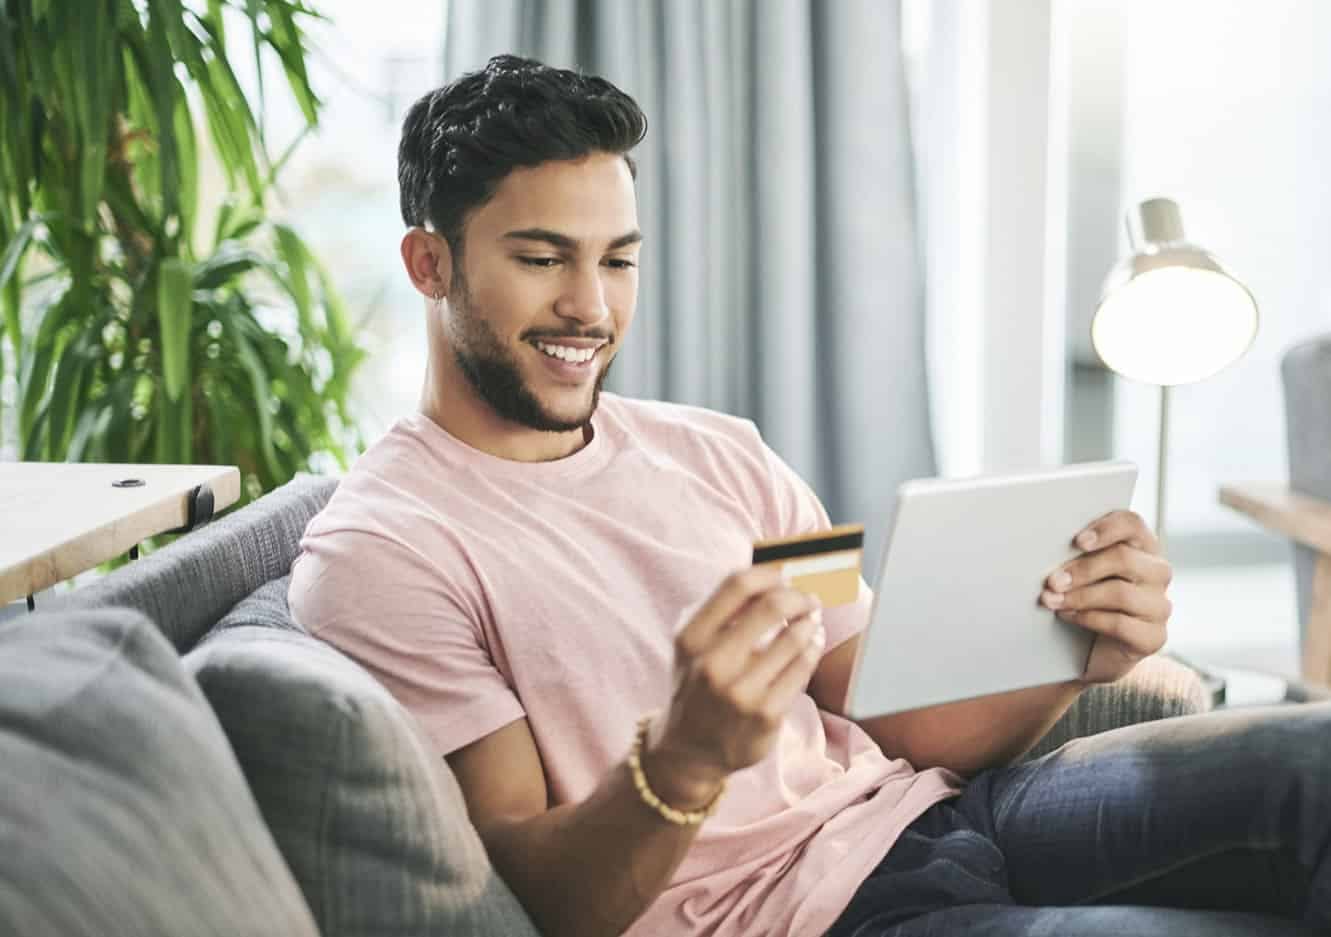 Man sitting on couch looking at card